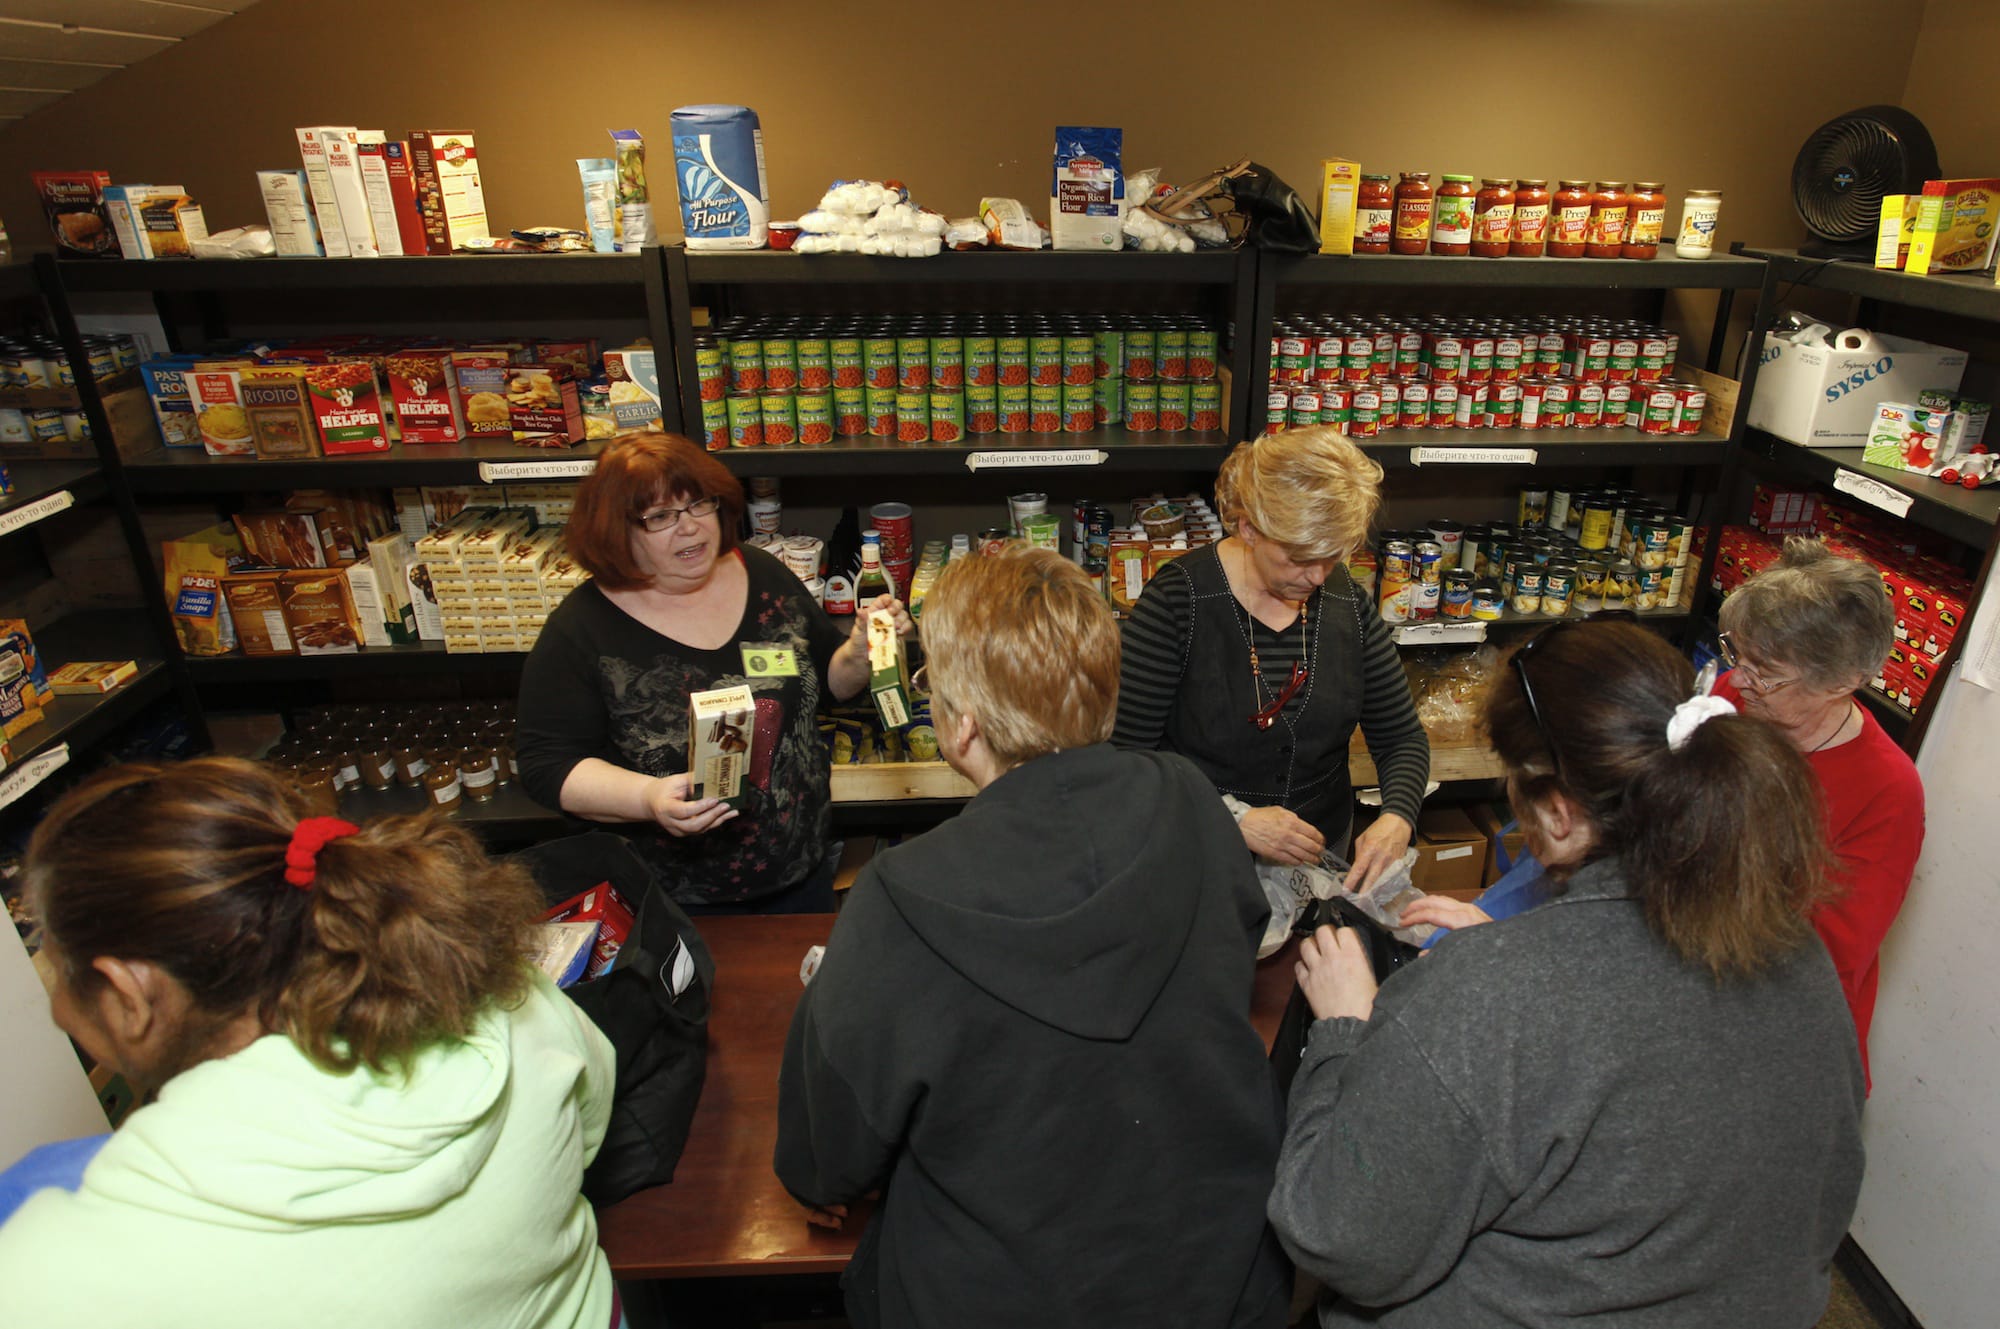 Volunteers Susie Riser, left, and Susan Stoval distribute grocery items to a capacity crowd at the SixEight food pantry in Hazel Dell.